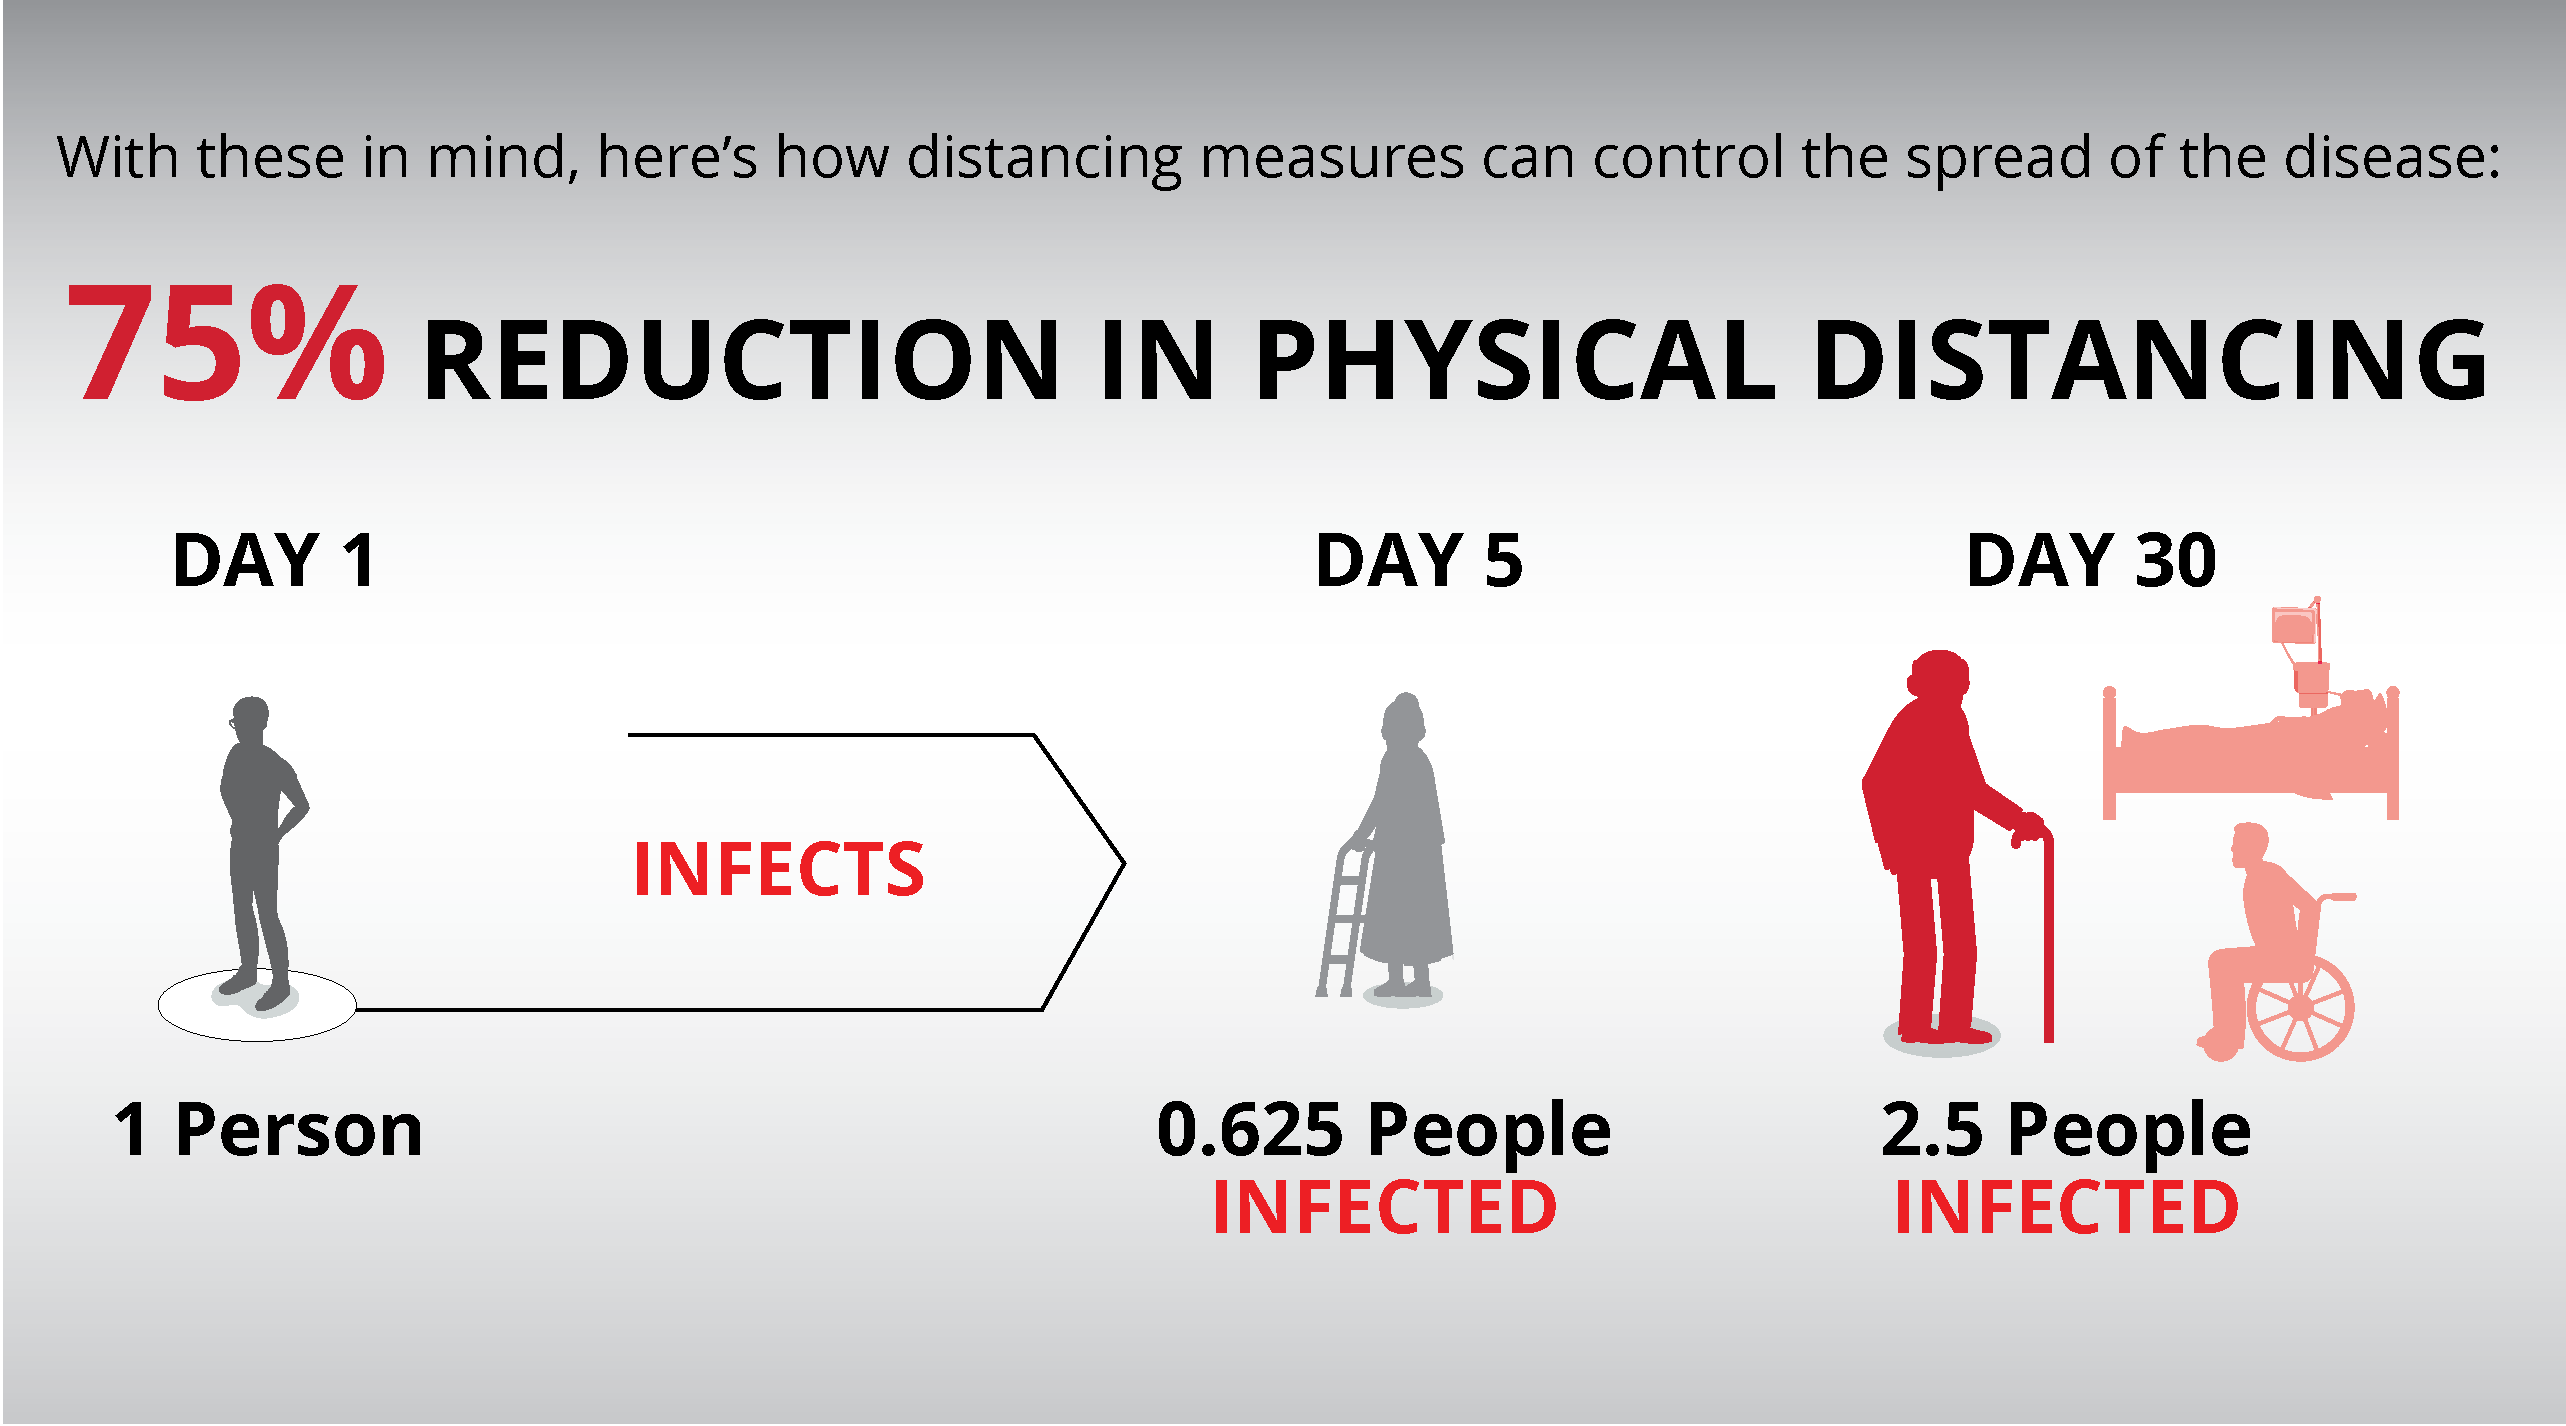 75% reduction in physical distanicng. One person infects 0.625 people on day 2.5 and 15 people on day 30